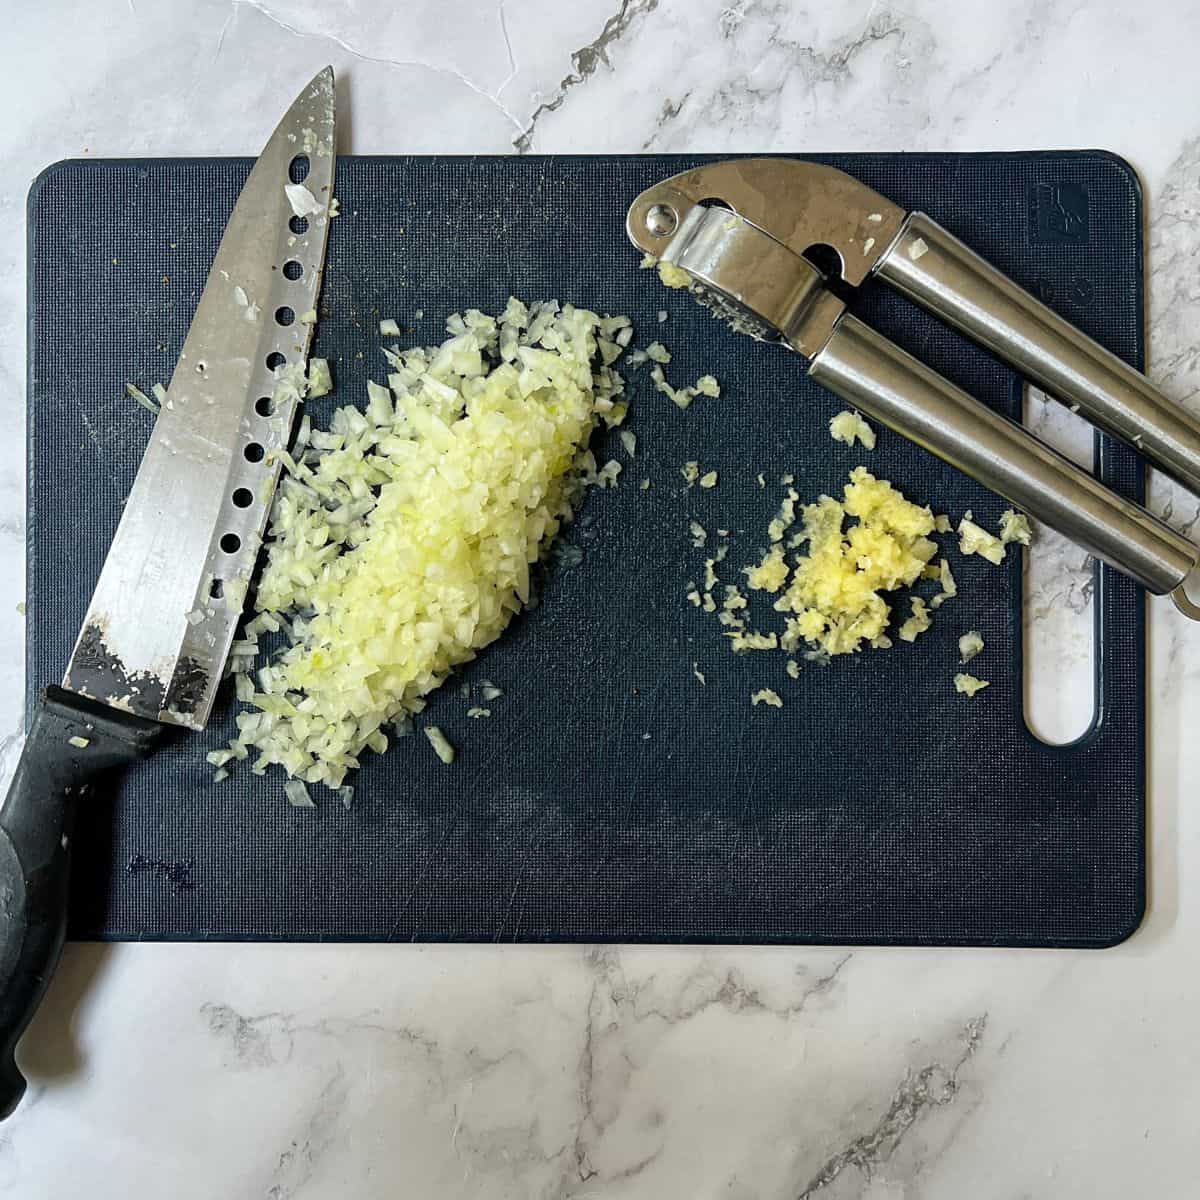 Chopped onion and garlic on a chopping board with a knife and garlic press.